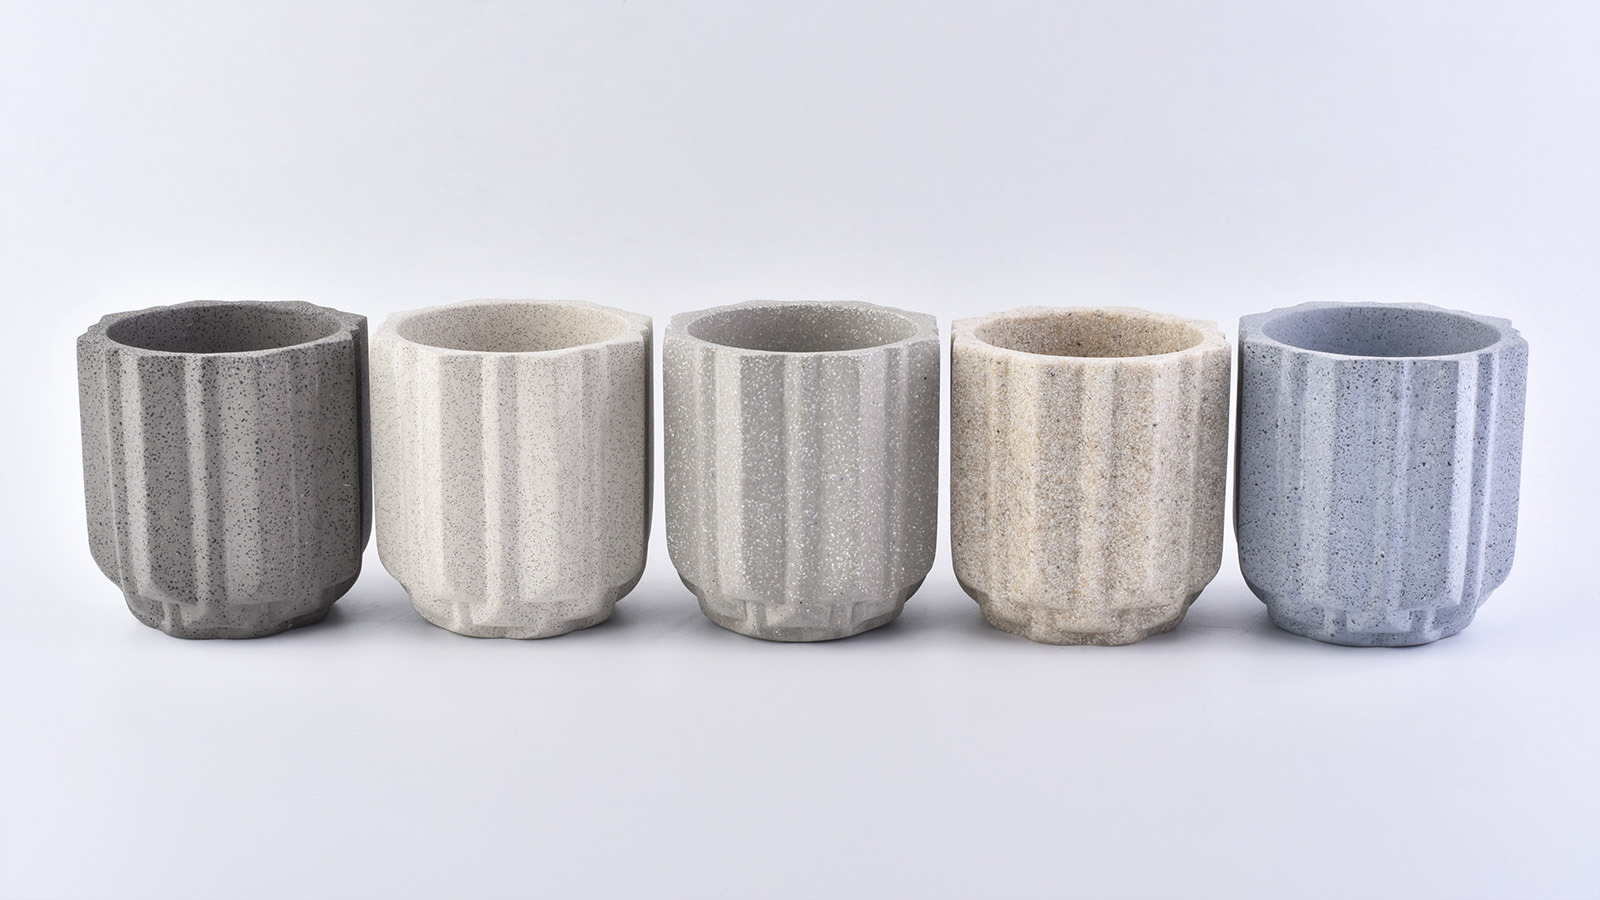 New arrival Embossed Concrete Candle Holder With Lids